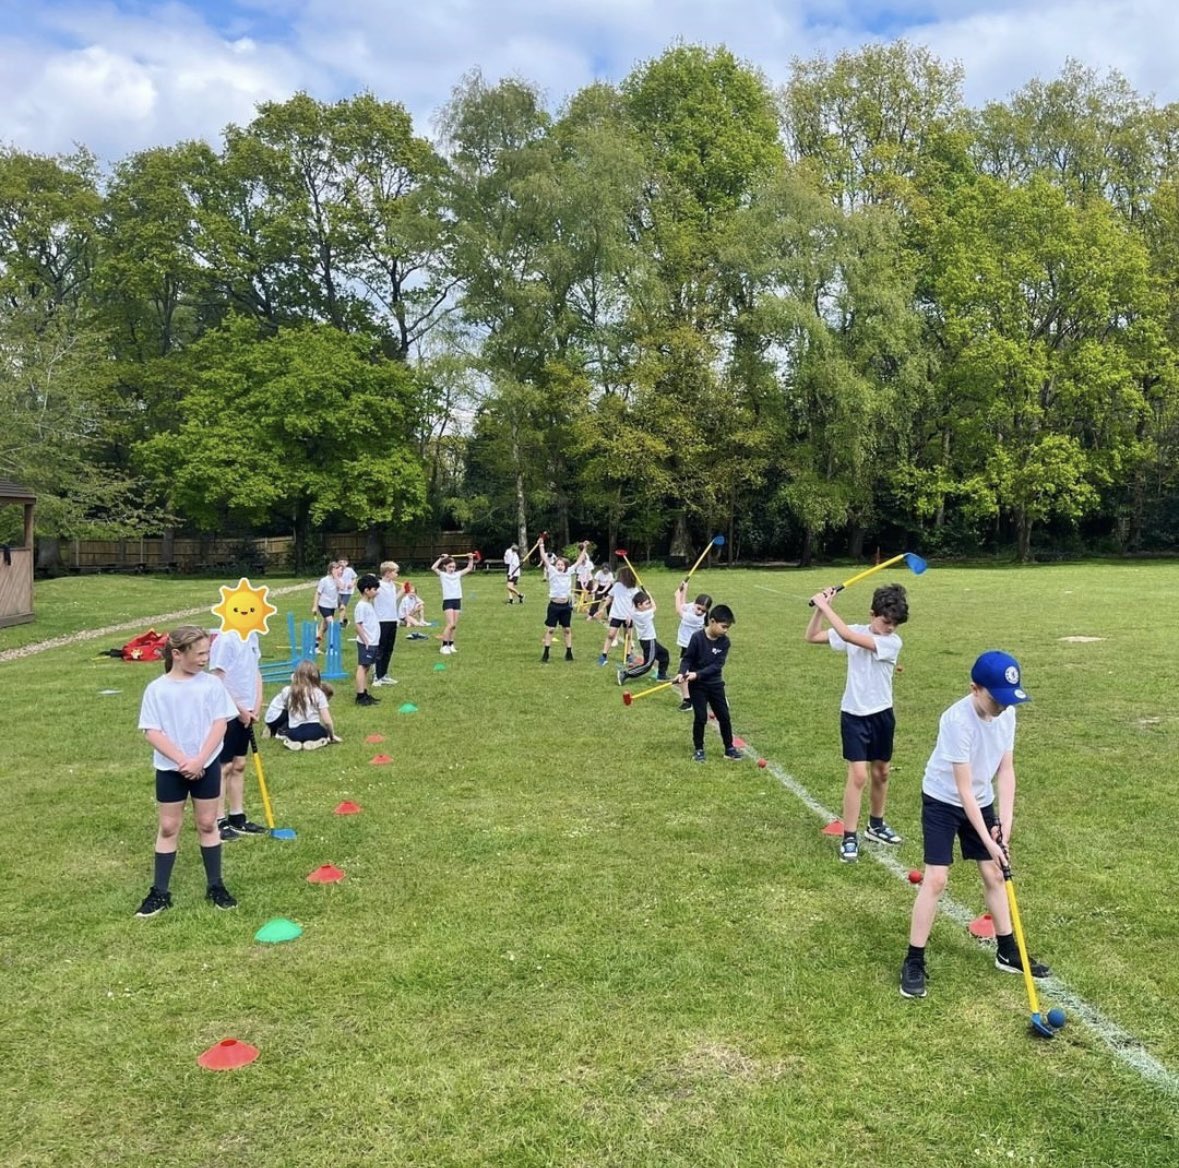 Year 4 had great fun last week practising their golf skills! They took turns at the driving range which was set up on our lovely school field ⛳